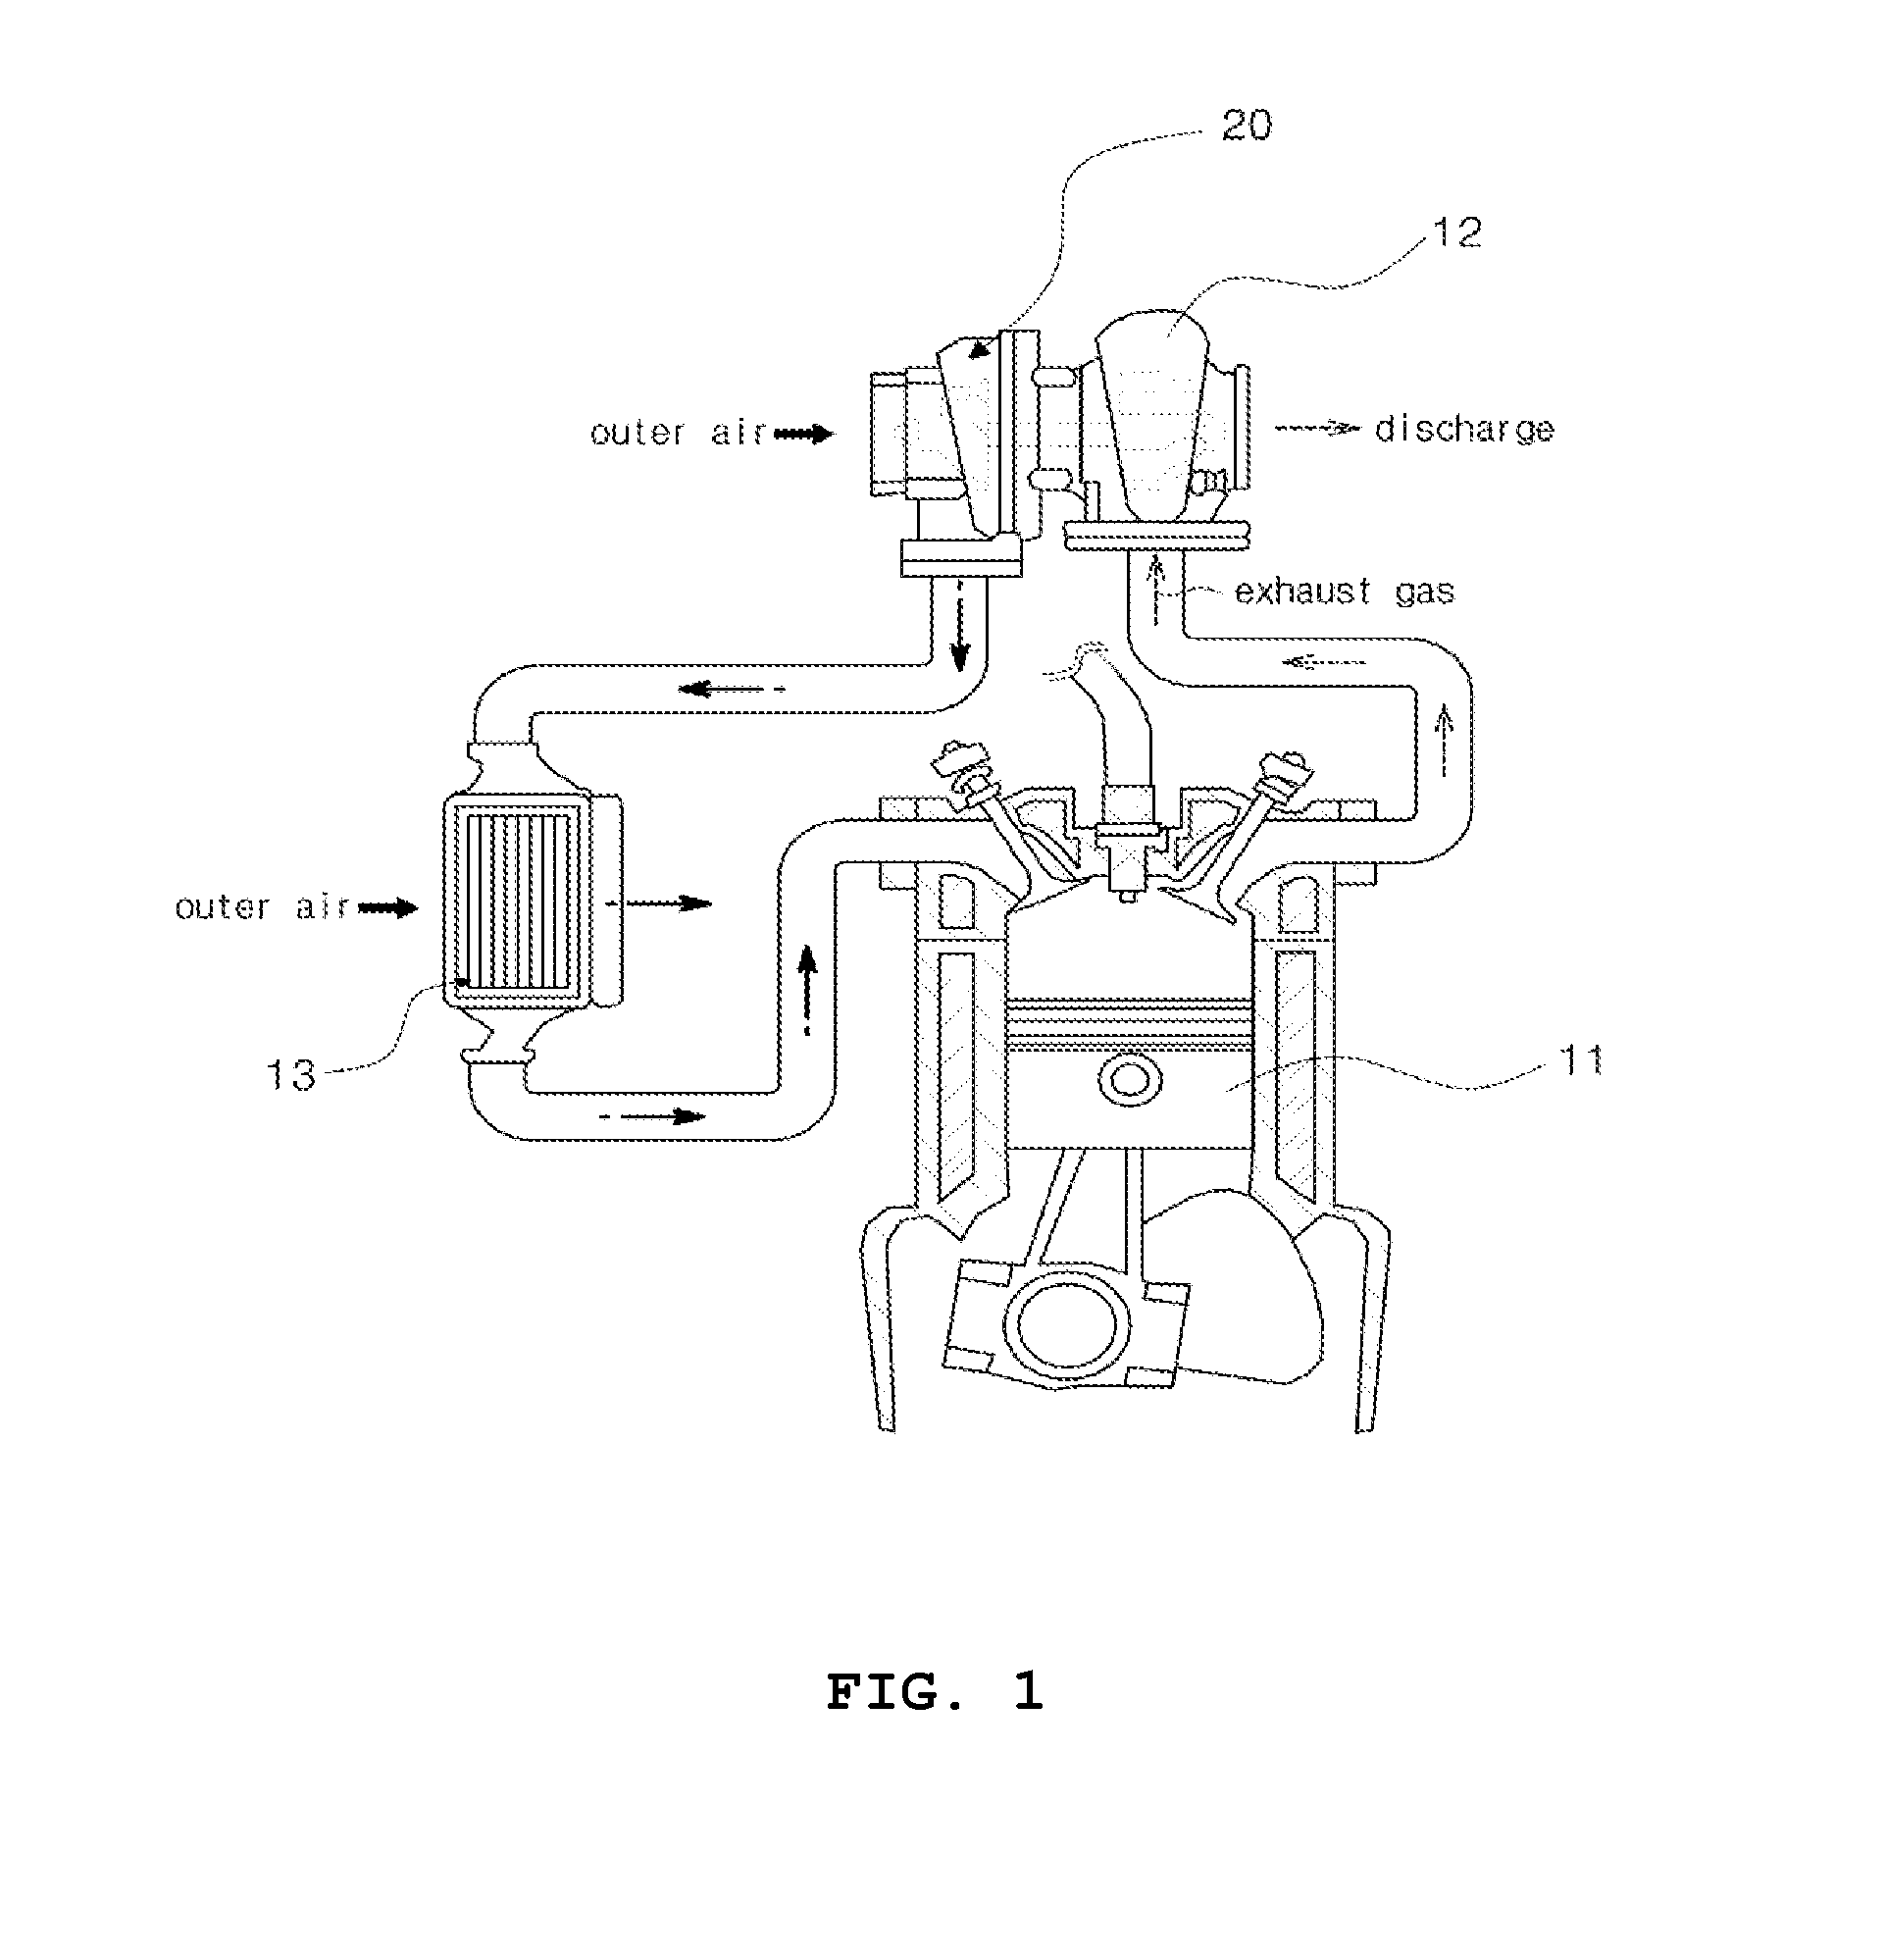 Adiabatic compressed air energy storage for automotive vehicle and energy storage method using the same